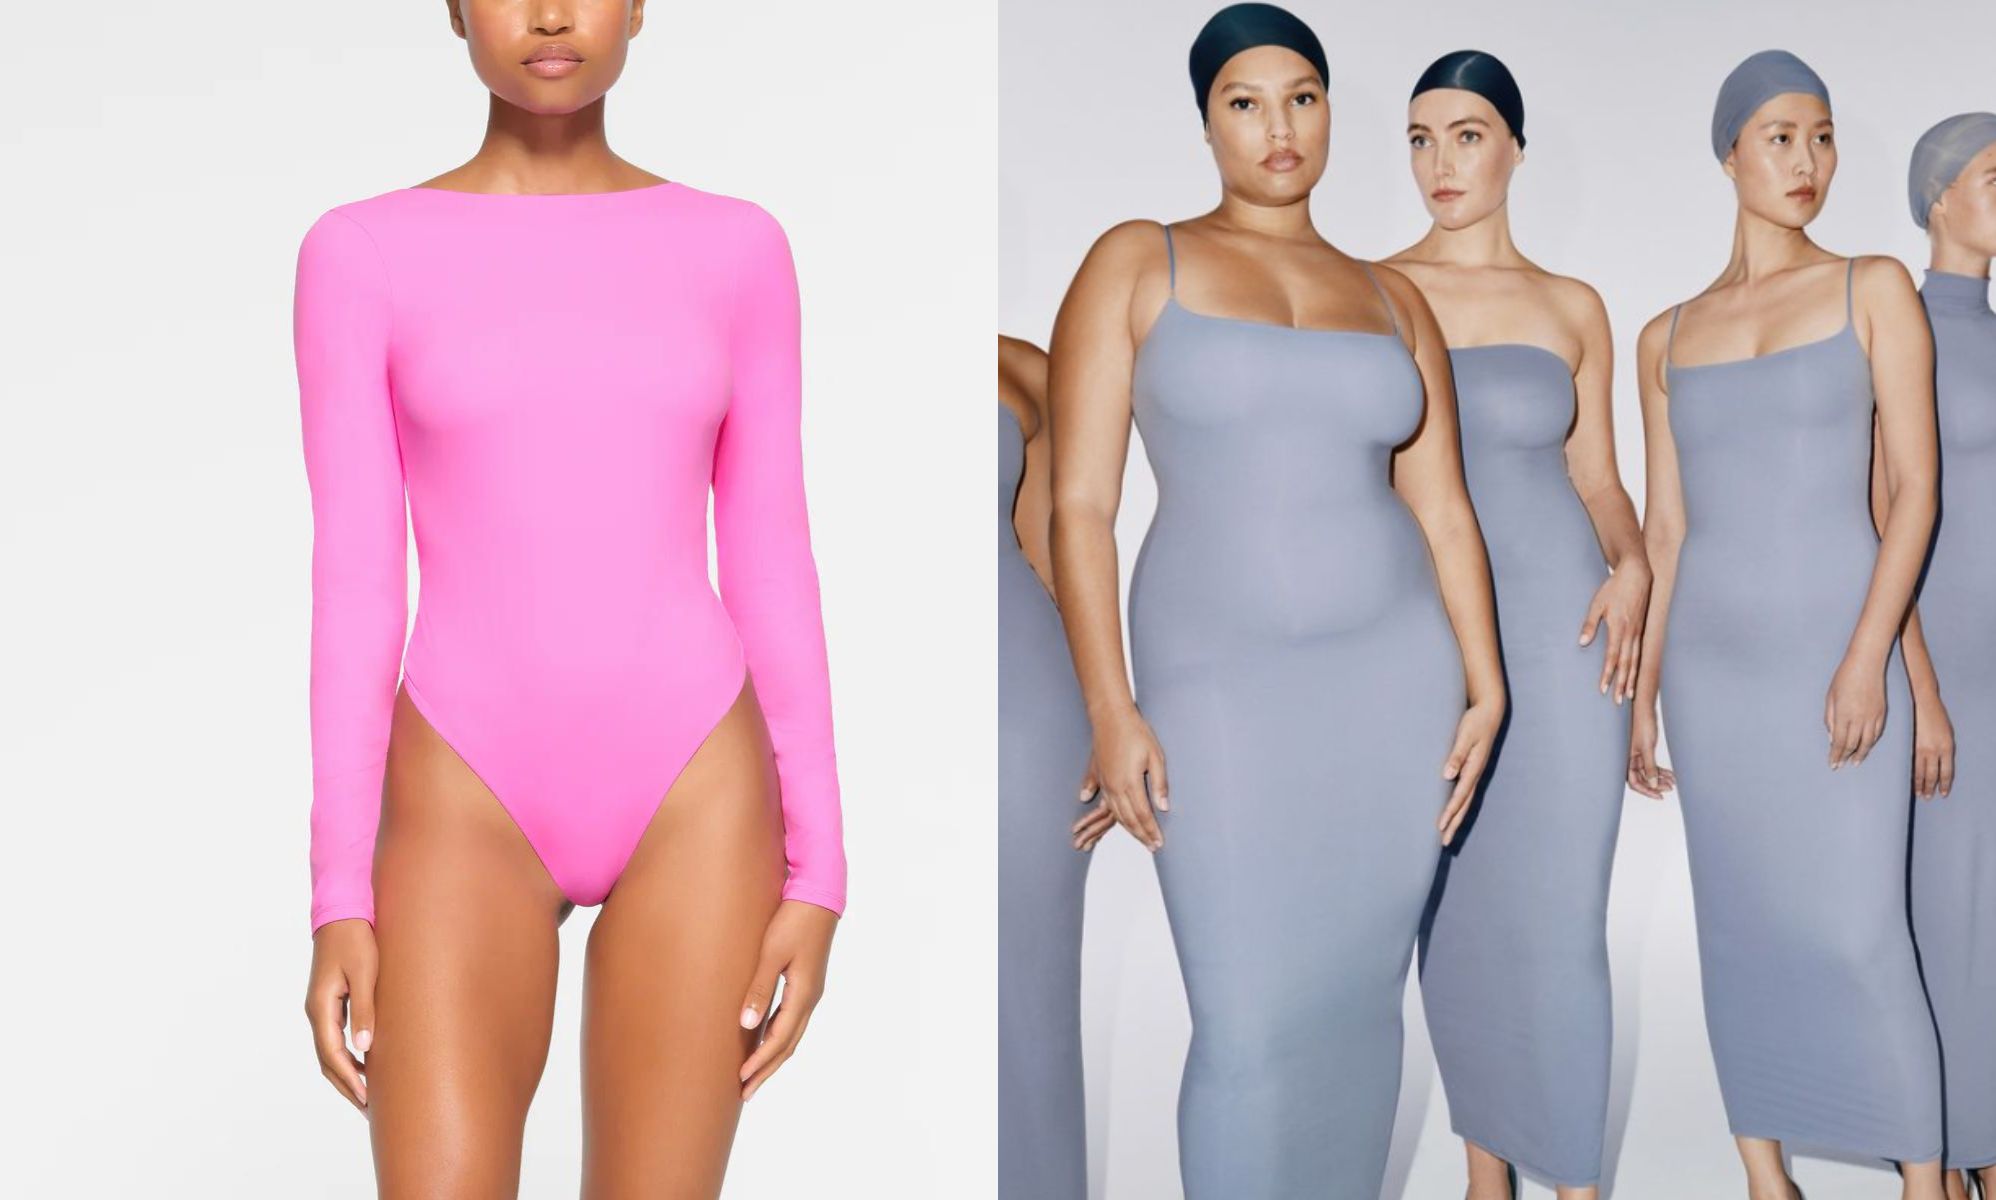 Kim Kardashian's New SKIMS Bodysuit Collection Is Here - Shop the  Super-Flattering Styles Now!